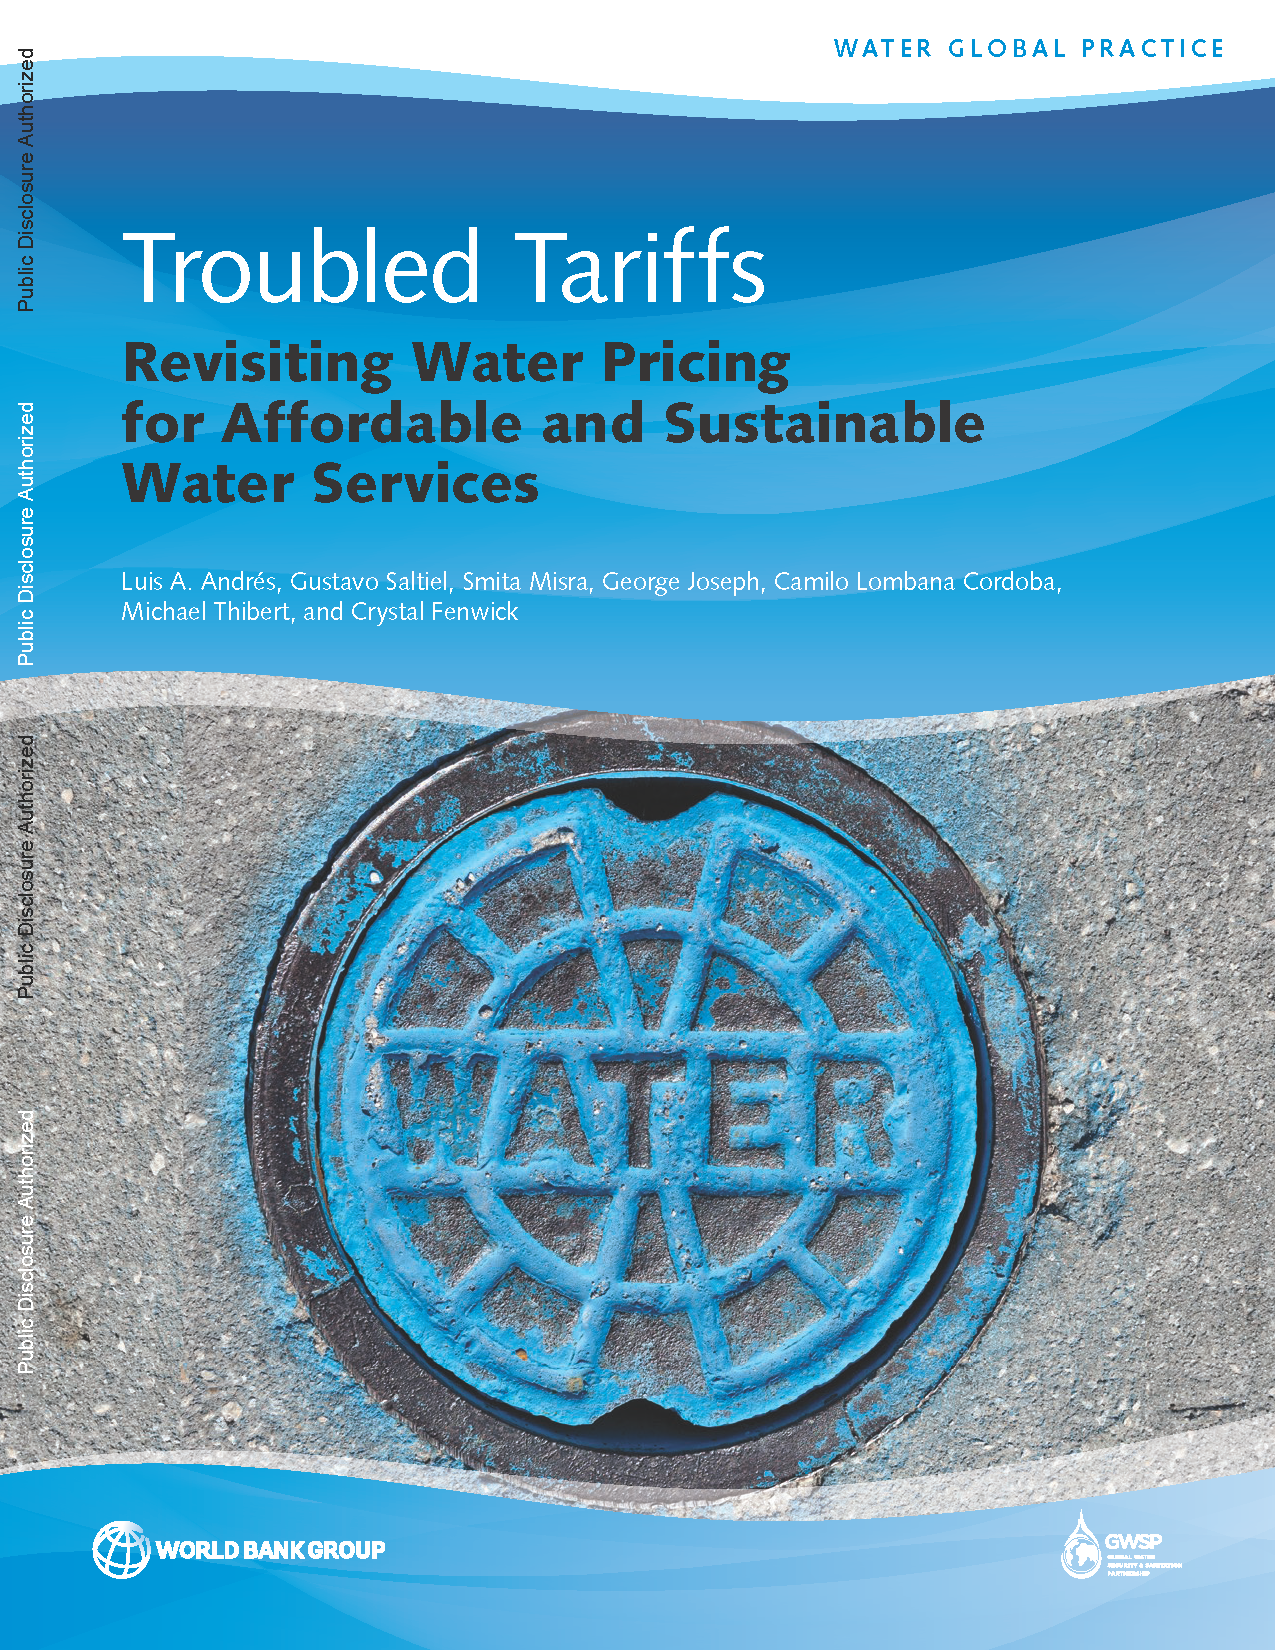 Page de couverture de Troubled Tariffs: Revisiting Water Pricing for Affordable and Sustainable Water Services